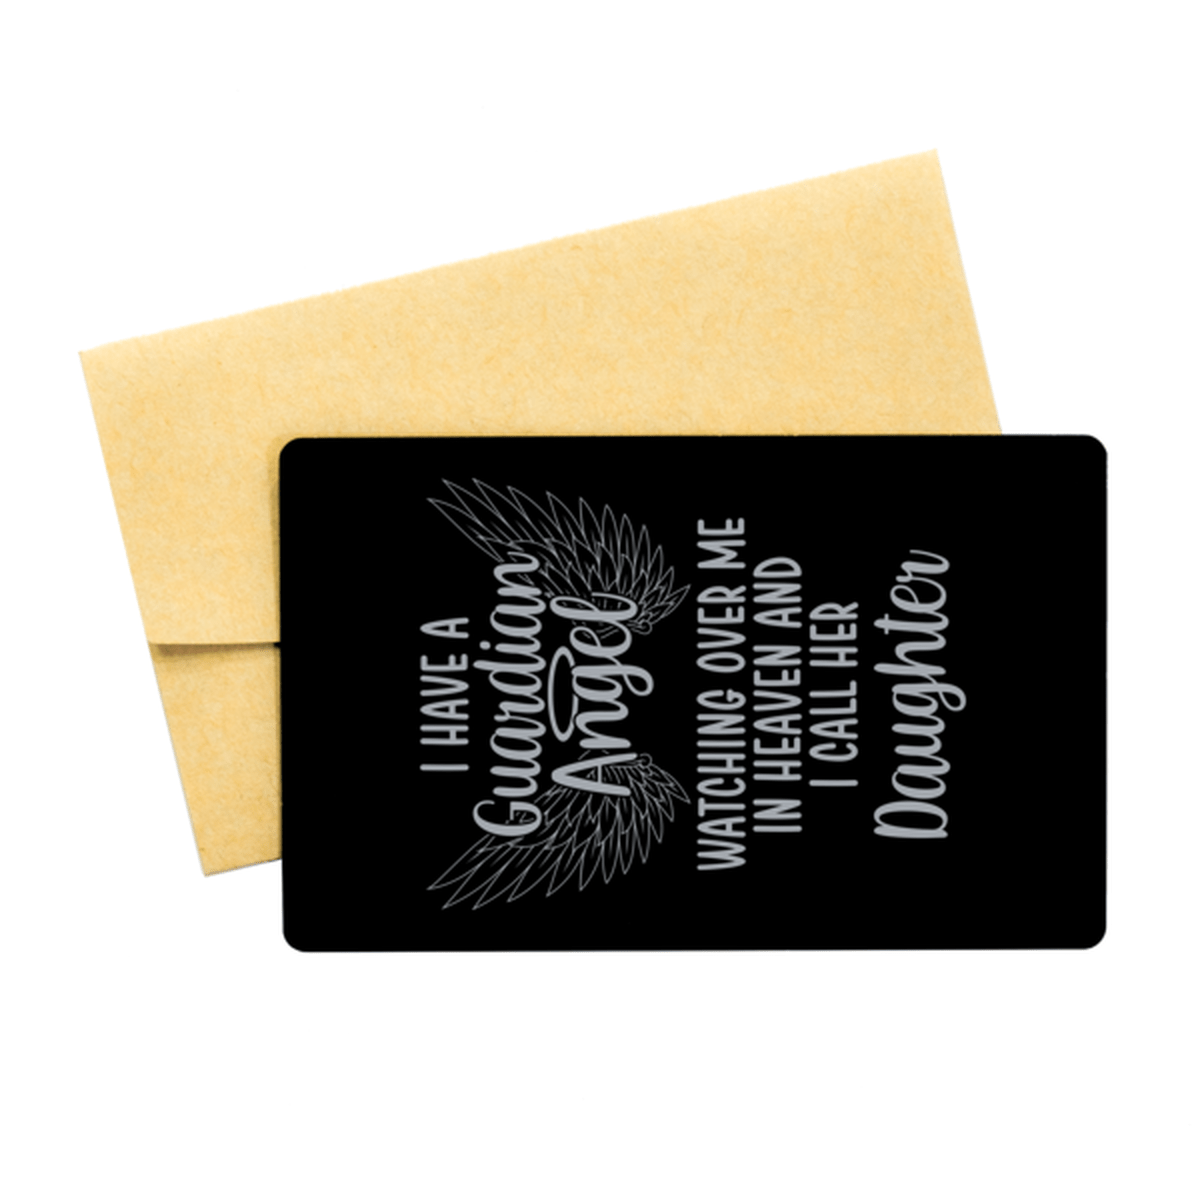 Memorial Daughter Black Aluminum Card, I Have a Guardian Angel I Call Her Daughter, Best Remembrance Gifts for Family Friends